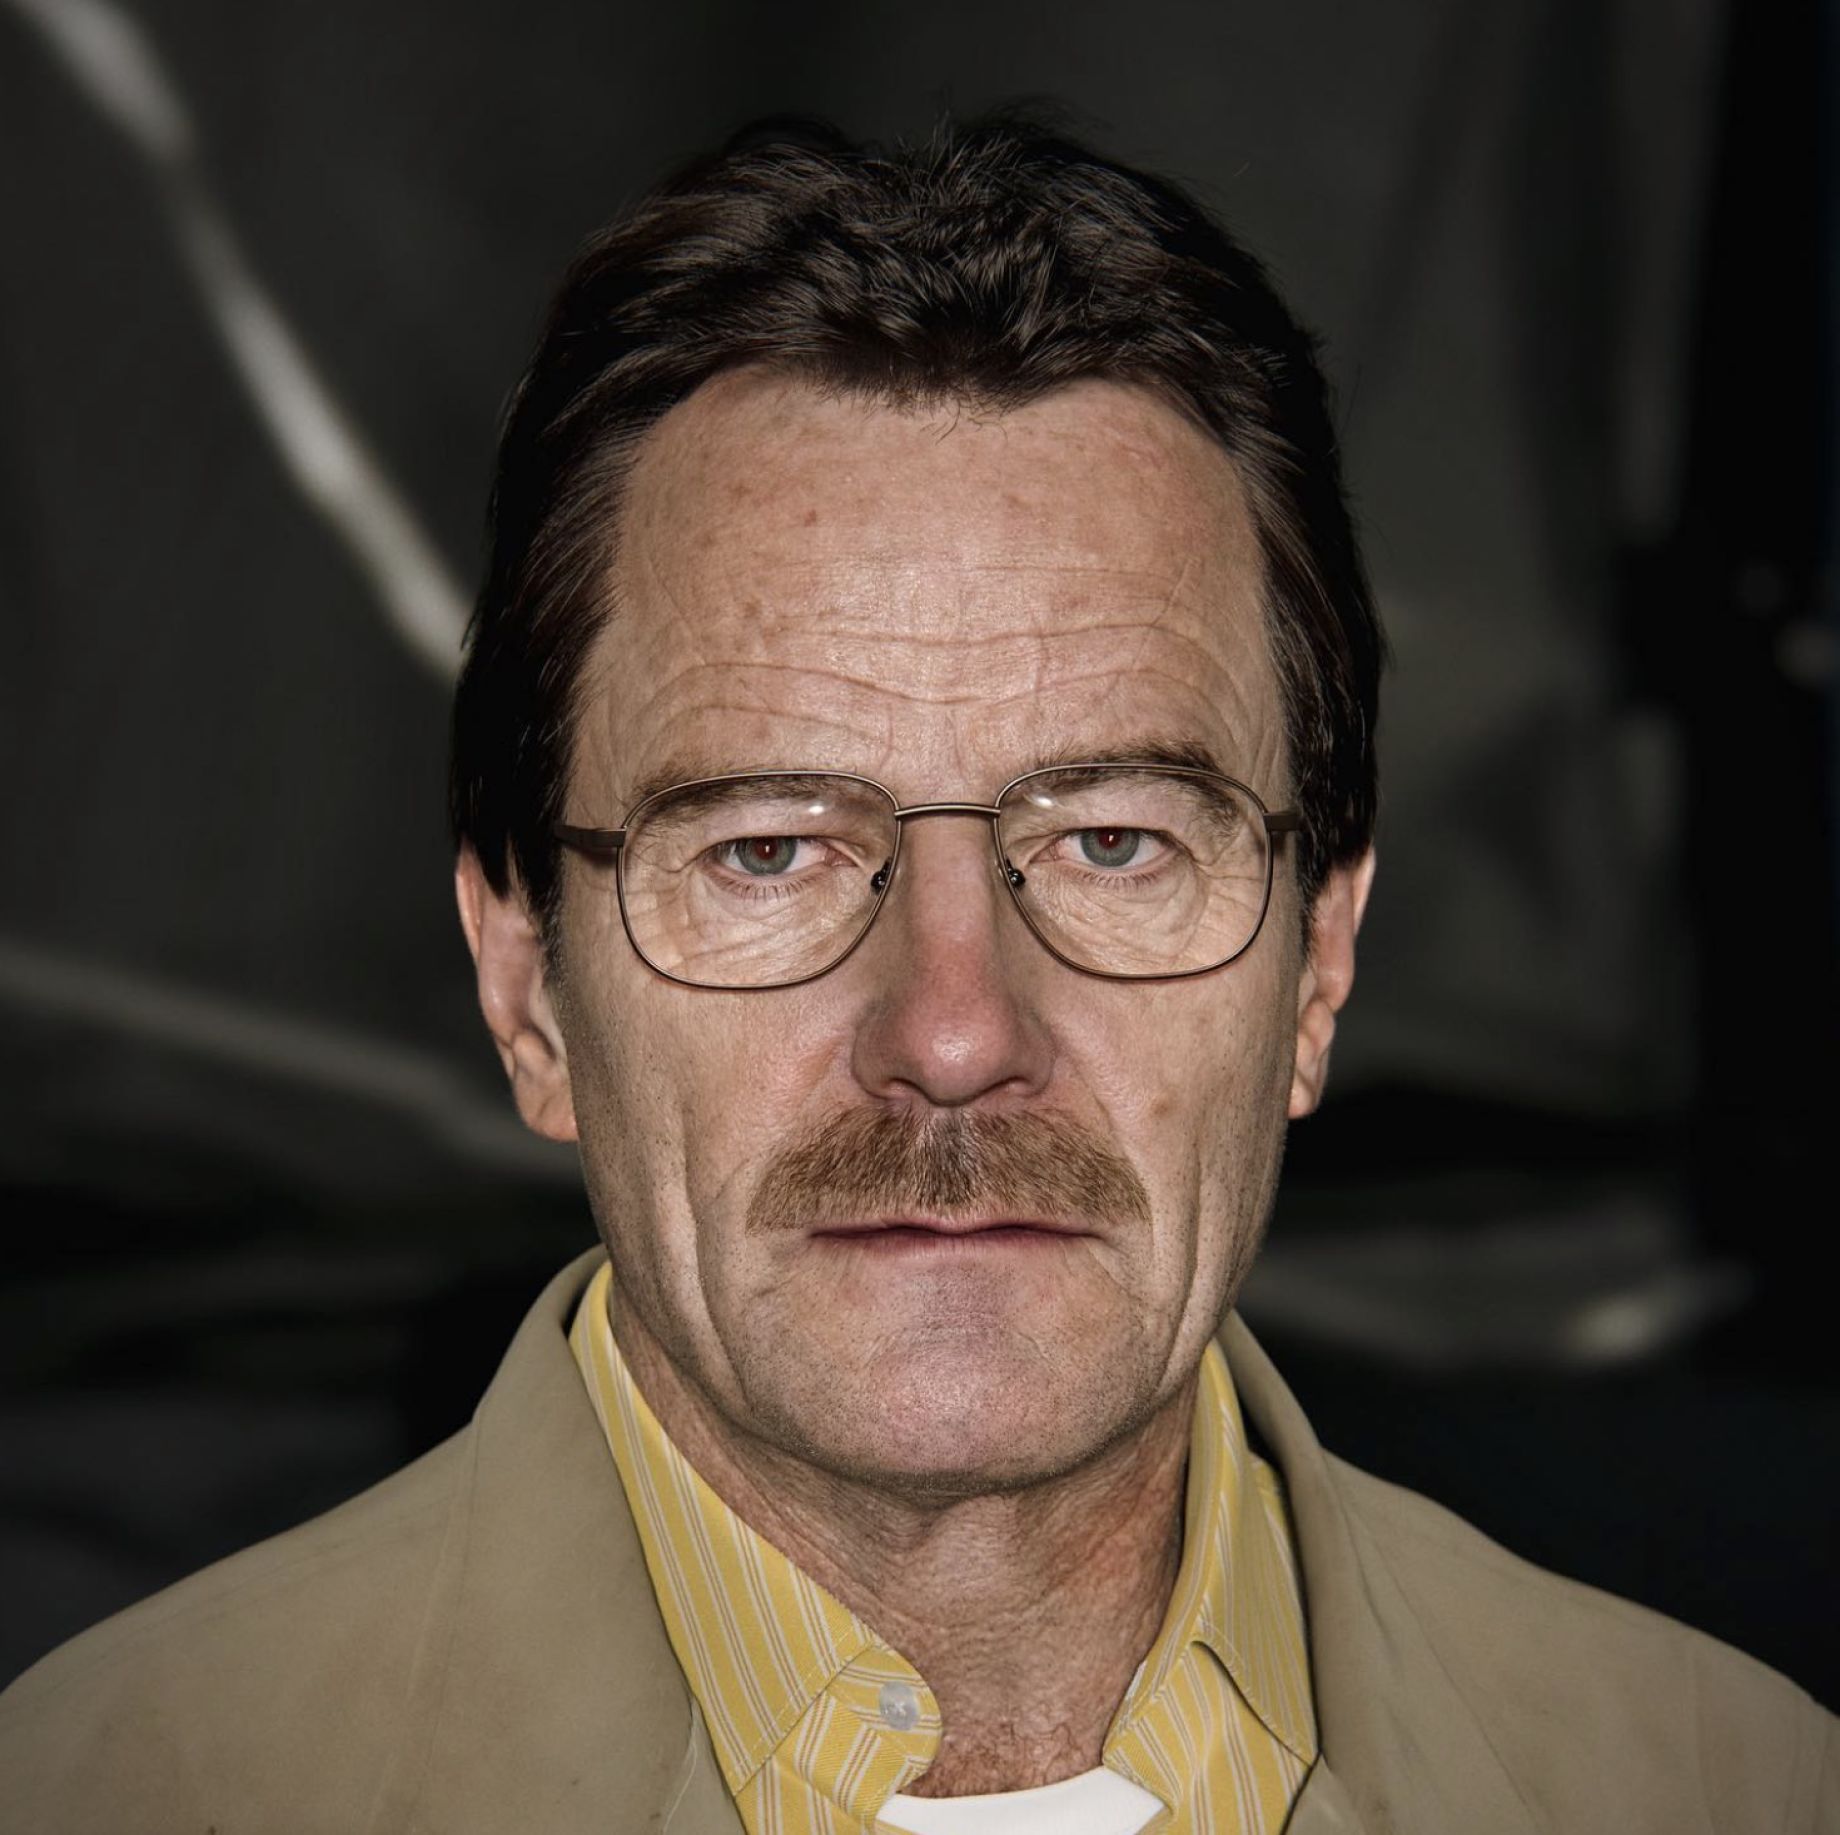 New Realistic 3D Portraits of Breaking Bad's Walter White